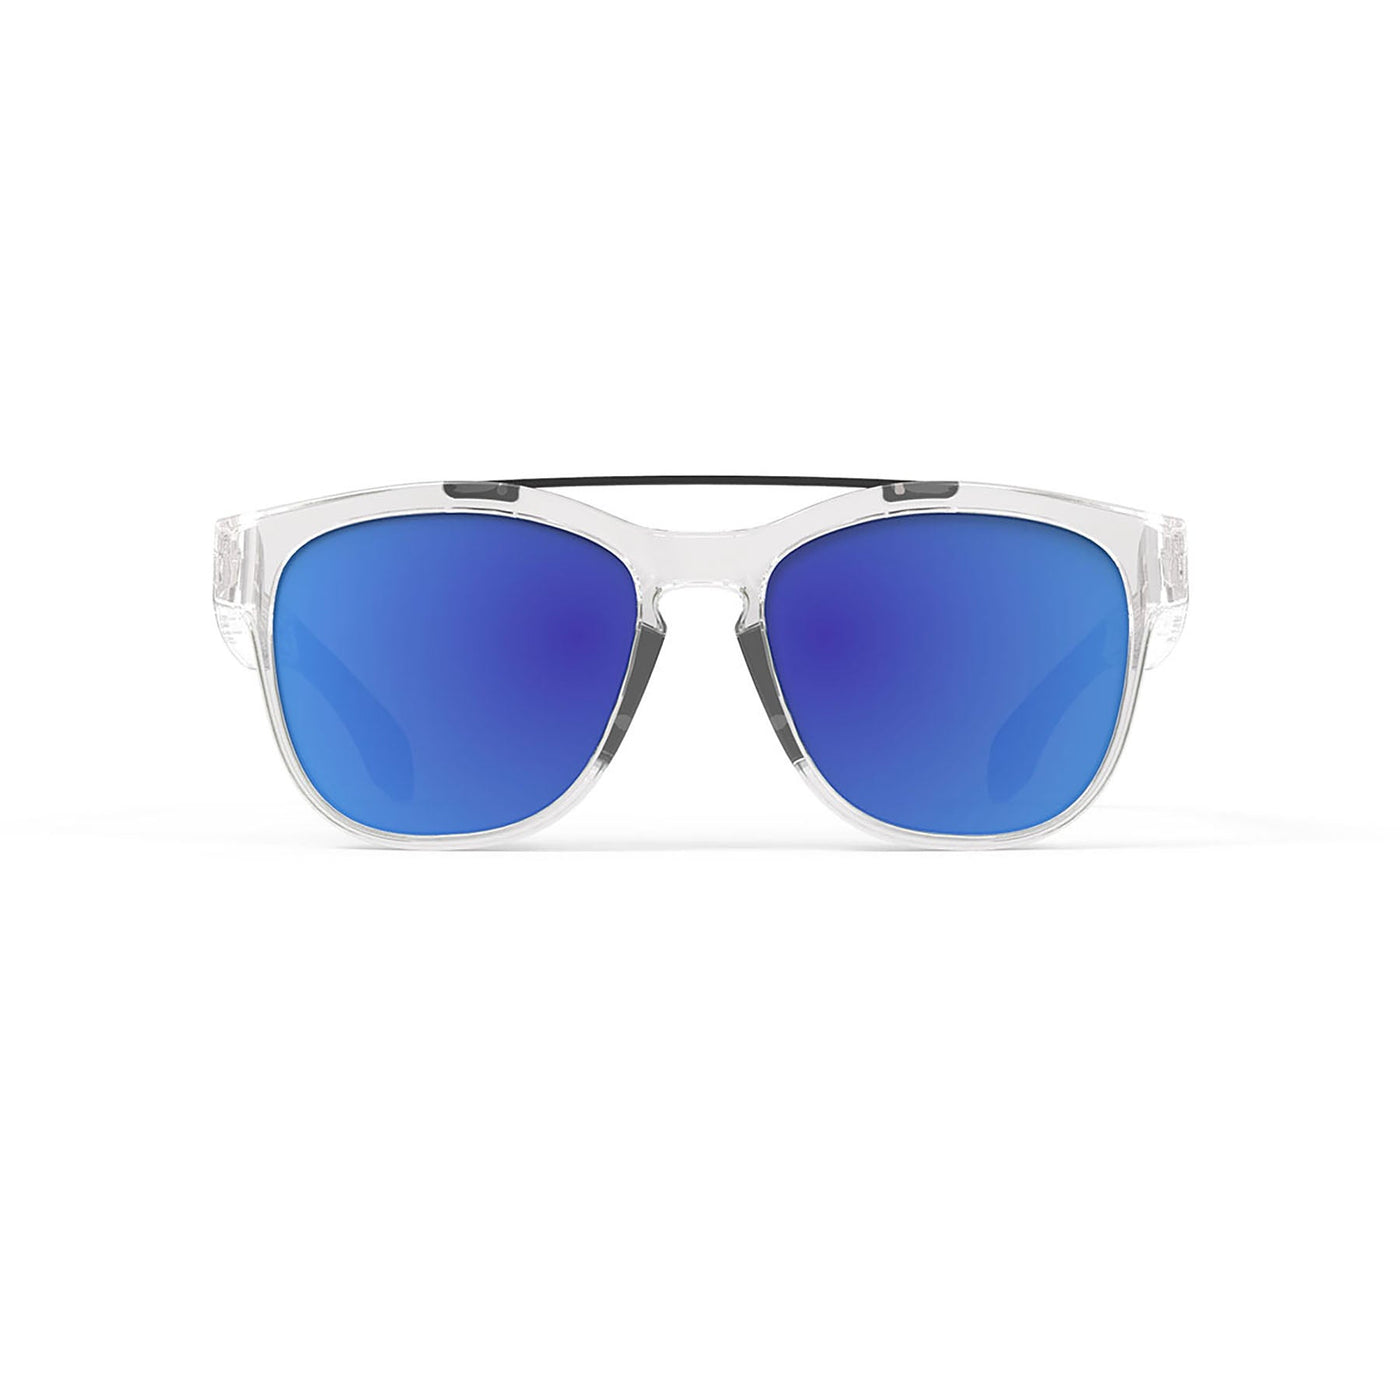 Rudy Project Spinair 59 active lifestyle and beach prescription sunglasses#color_spinair-59-crystal-gloss-frame-and-multilaser-blue-lenses